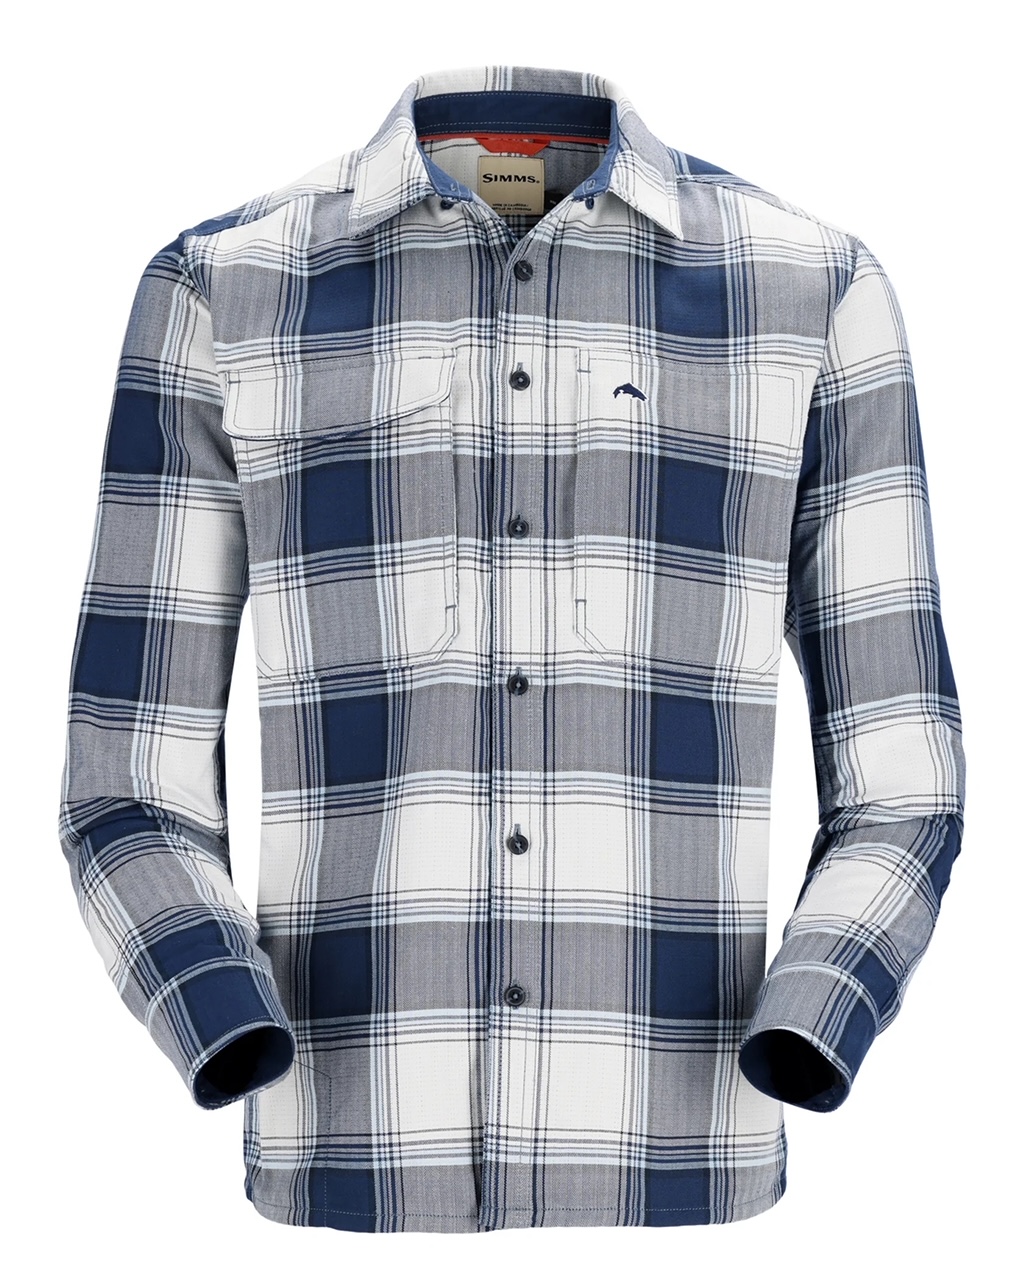 Simms M's Guide Flannel LS Shirt - Navy/White Dimensional Buffalo - Large